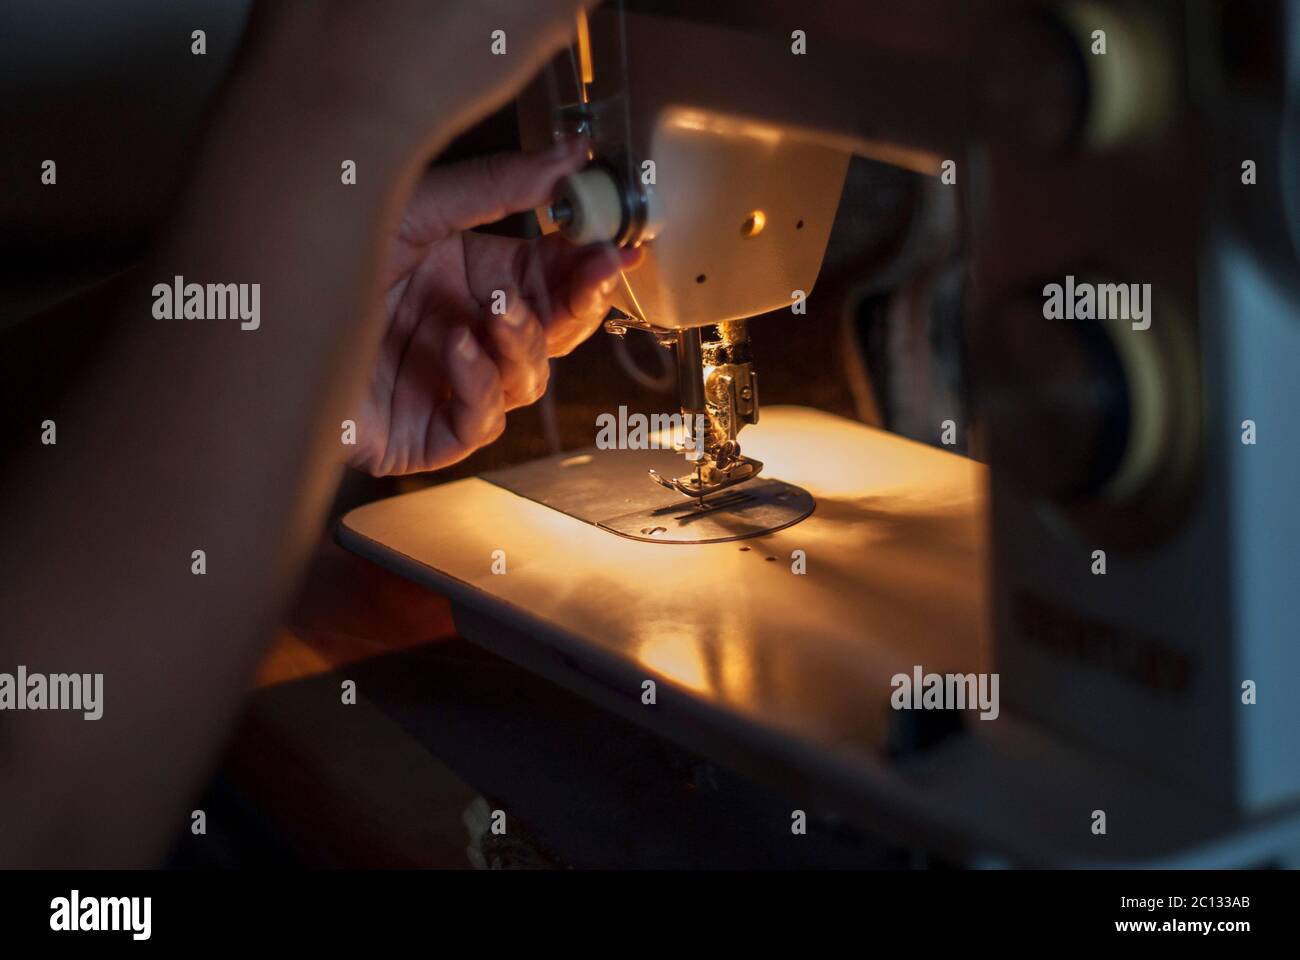 Woman's hand  working on a sewing machine Stock Photo